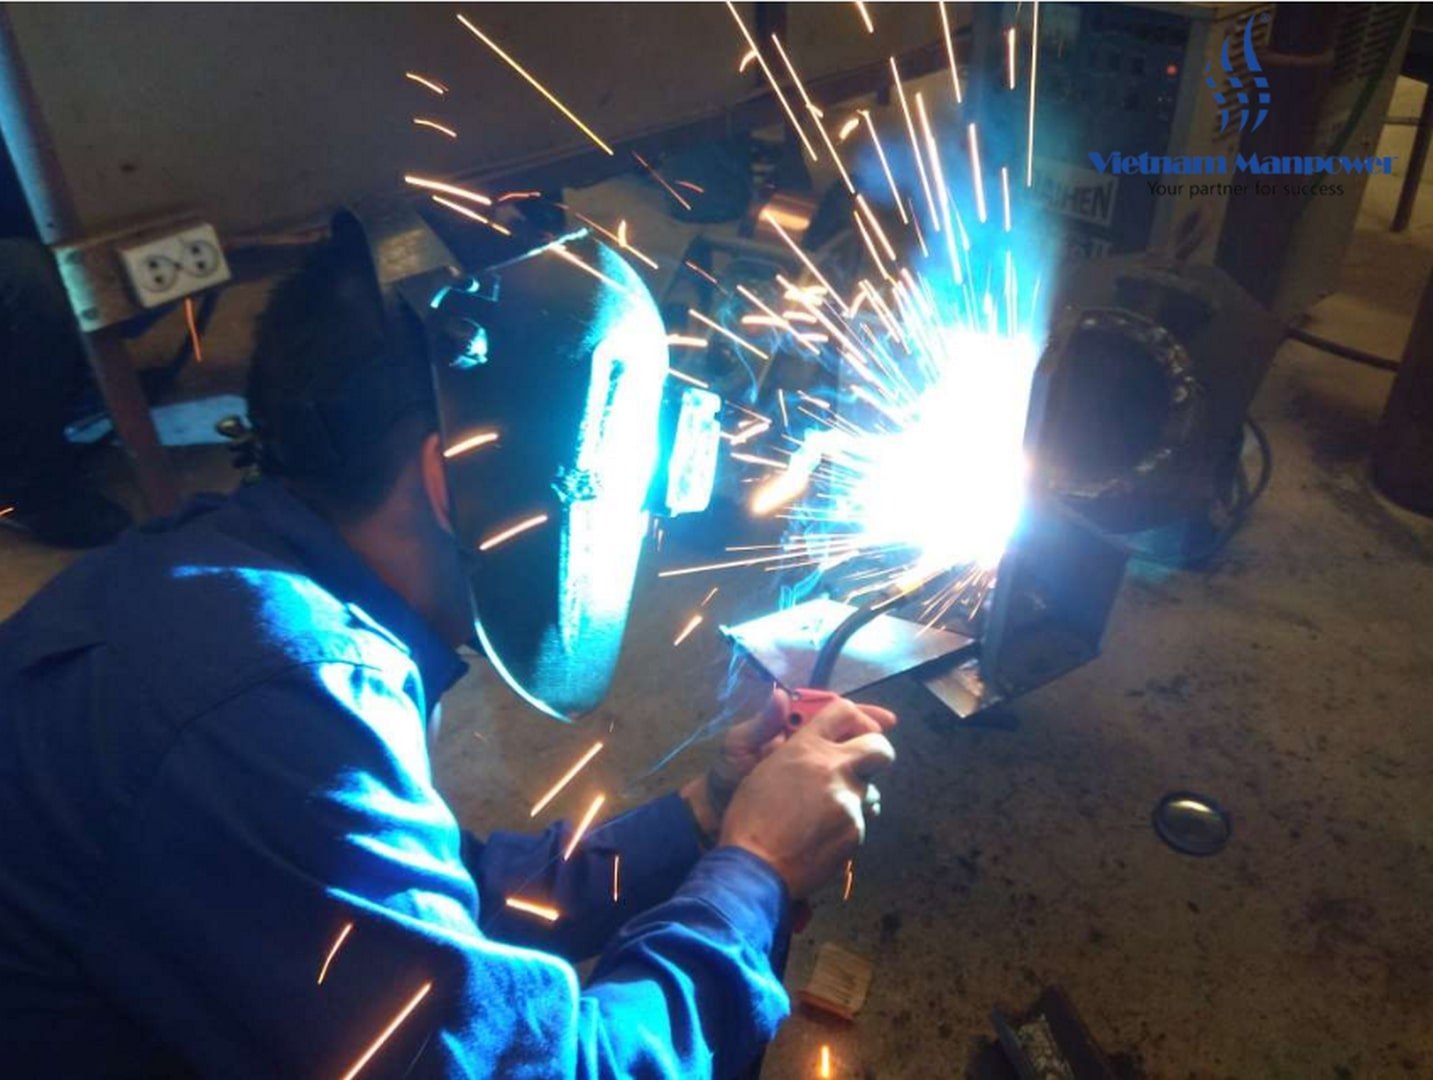 The reasons why employers like to recruit welders in Vietnam